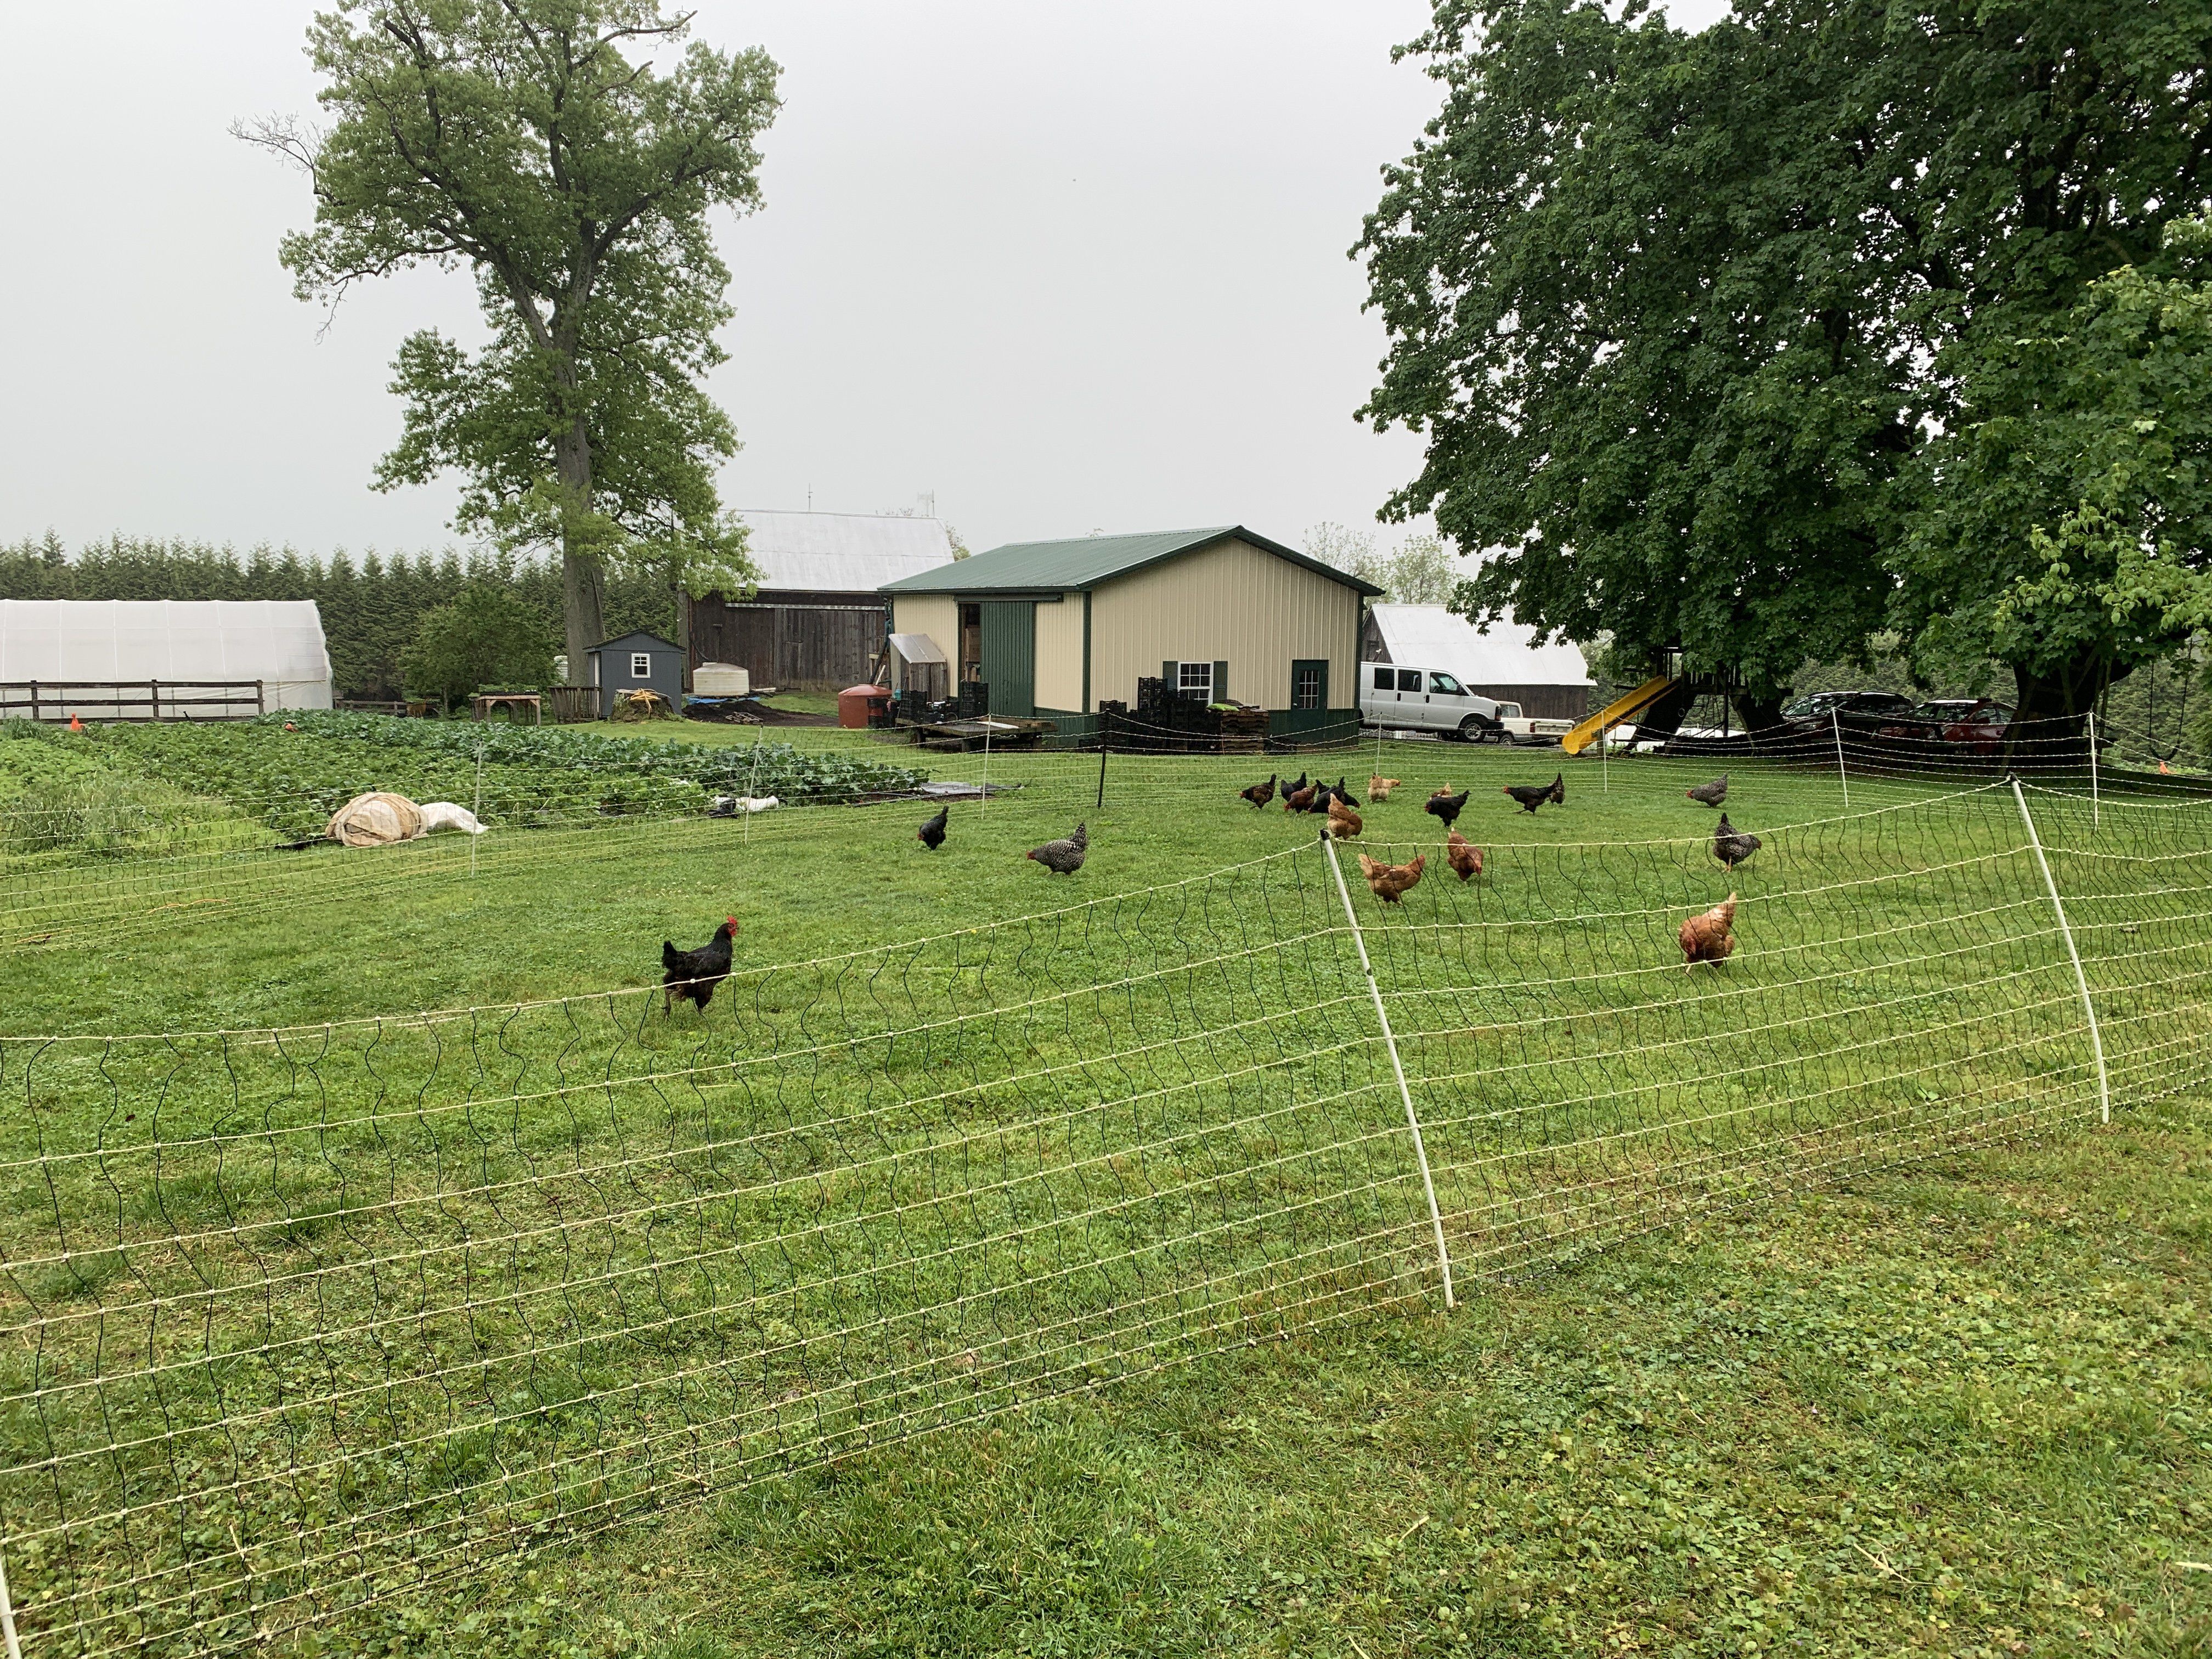 Next Happening: Farm Happenings for July 4, 2020